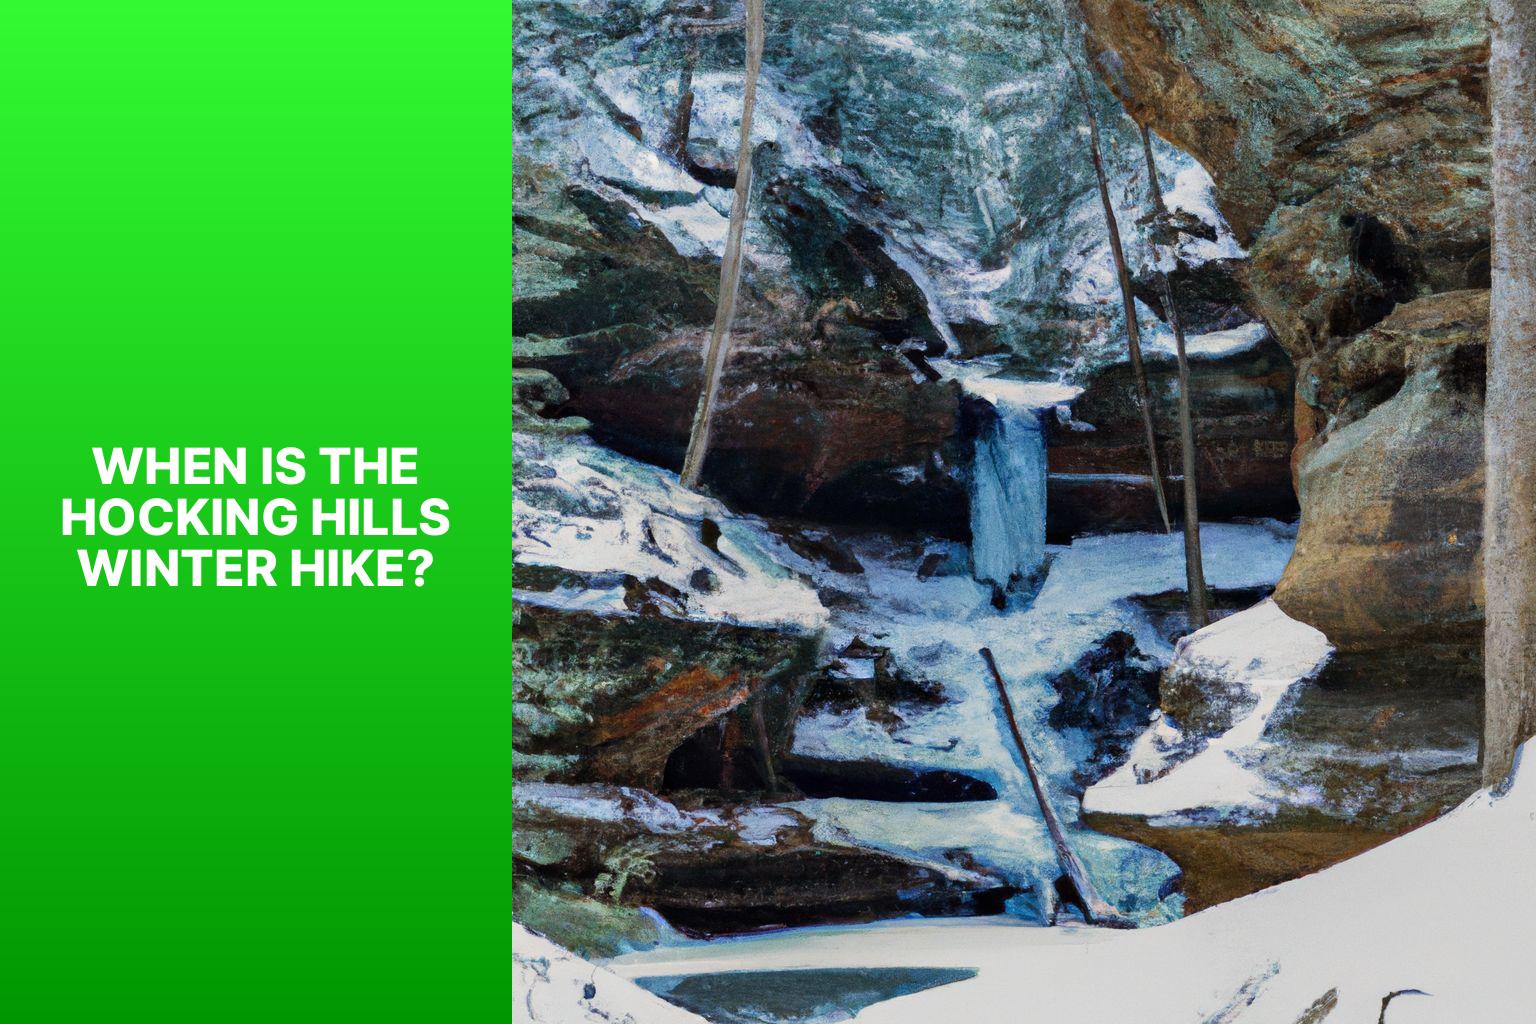 When is the Hocking Hills Winter Hike? - When is Hocking Hills Winter Hike? 